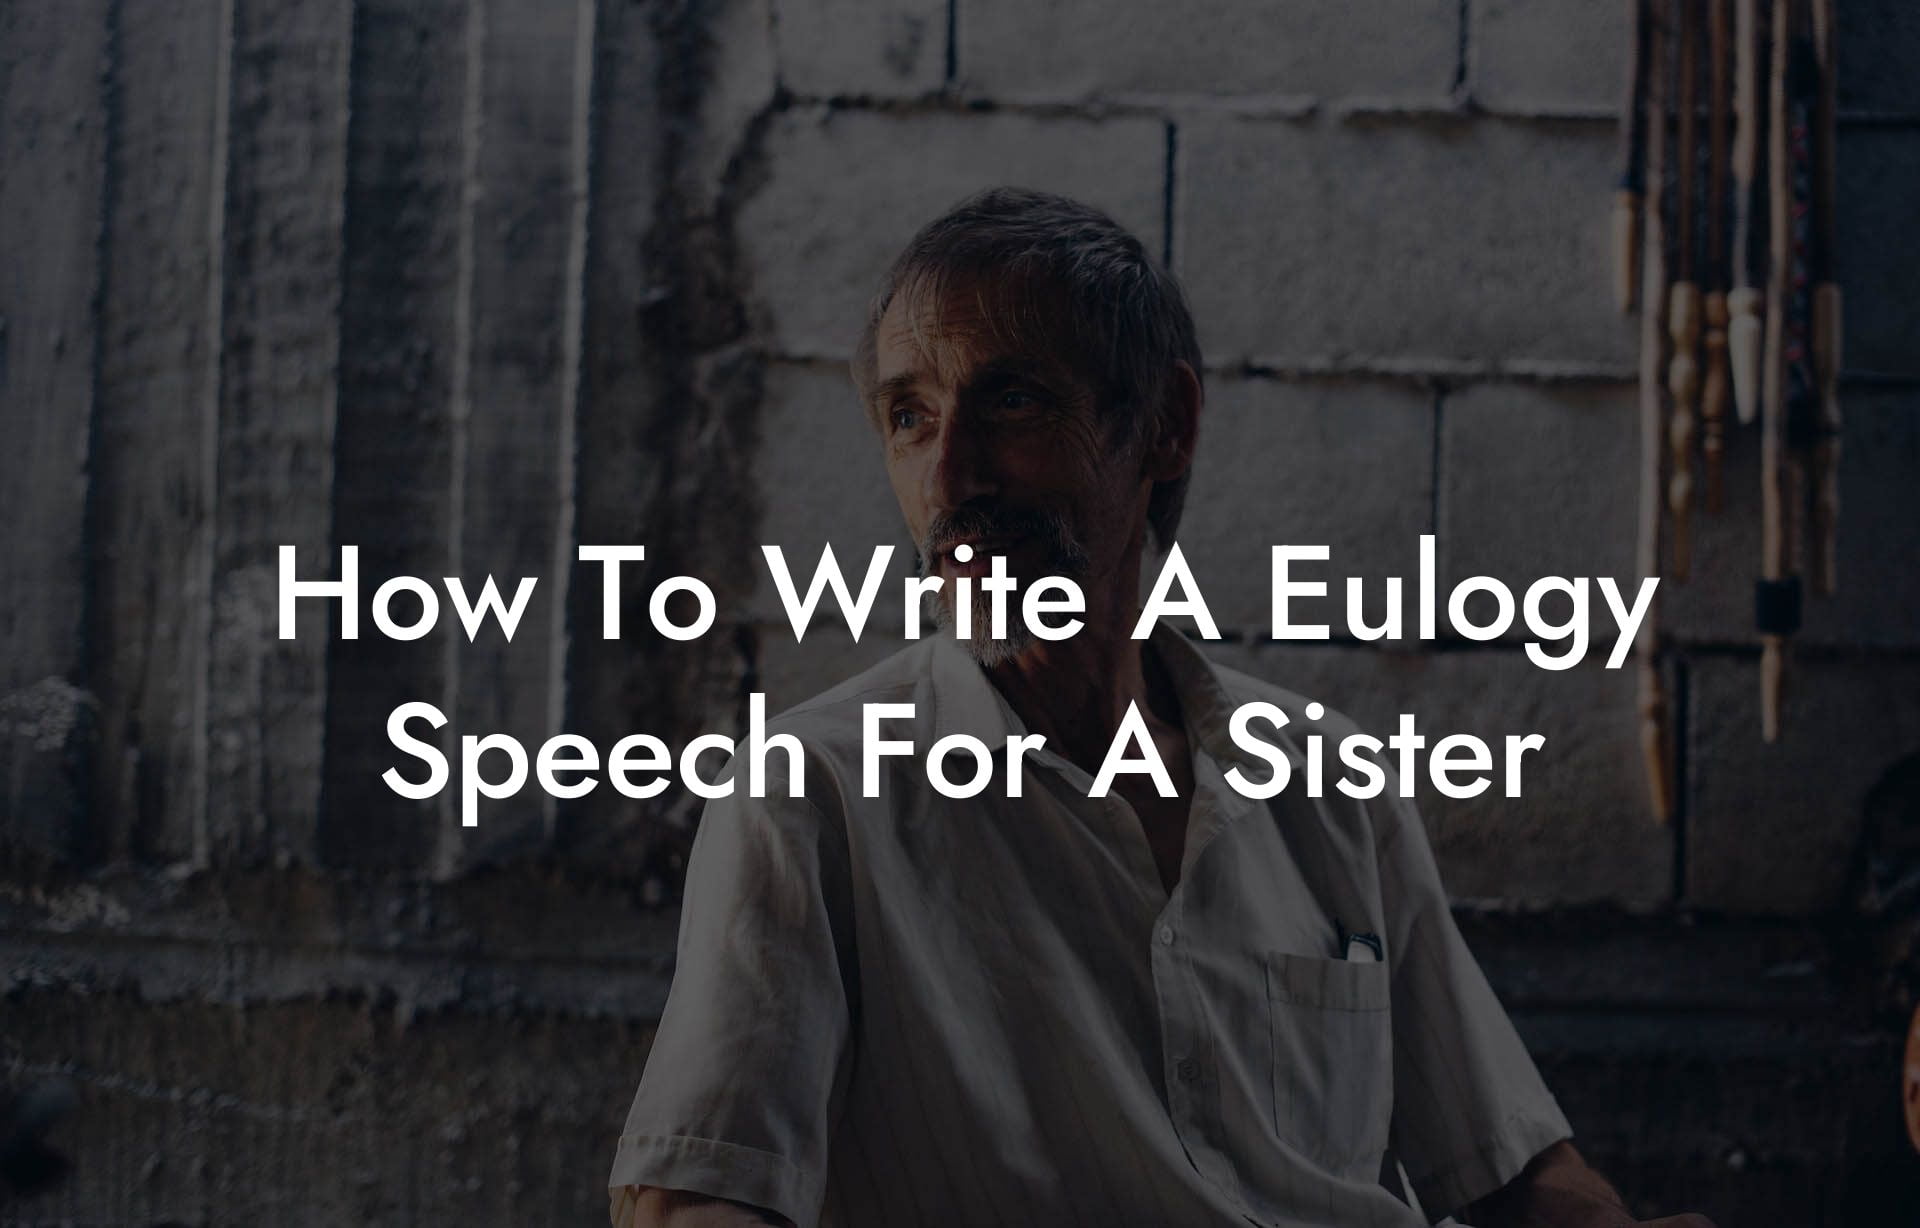 How To Write A Eulogy Speech For A Sister